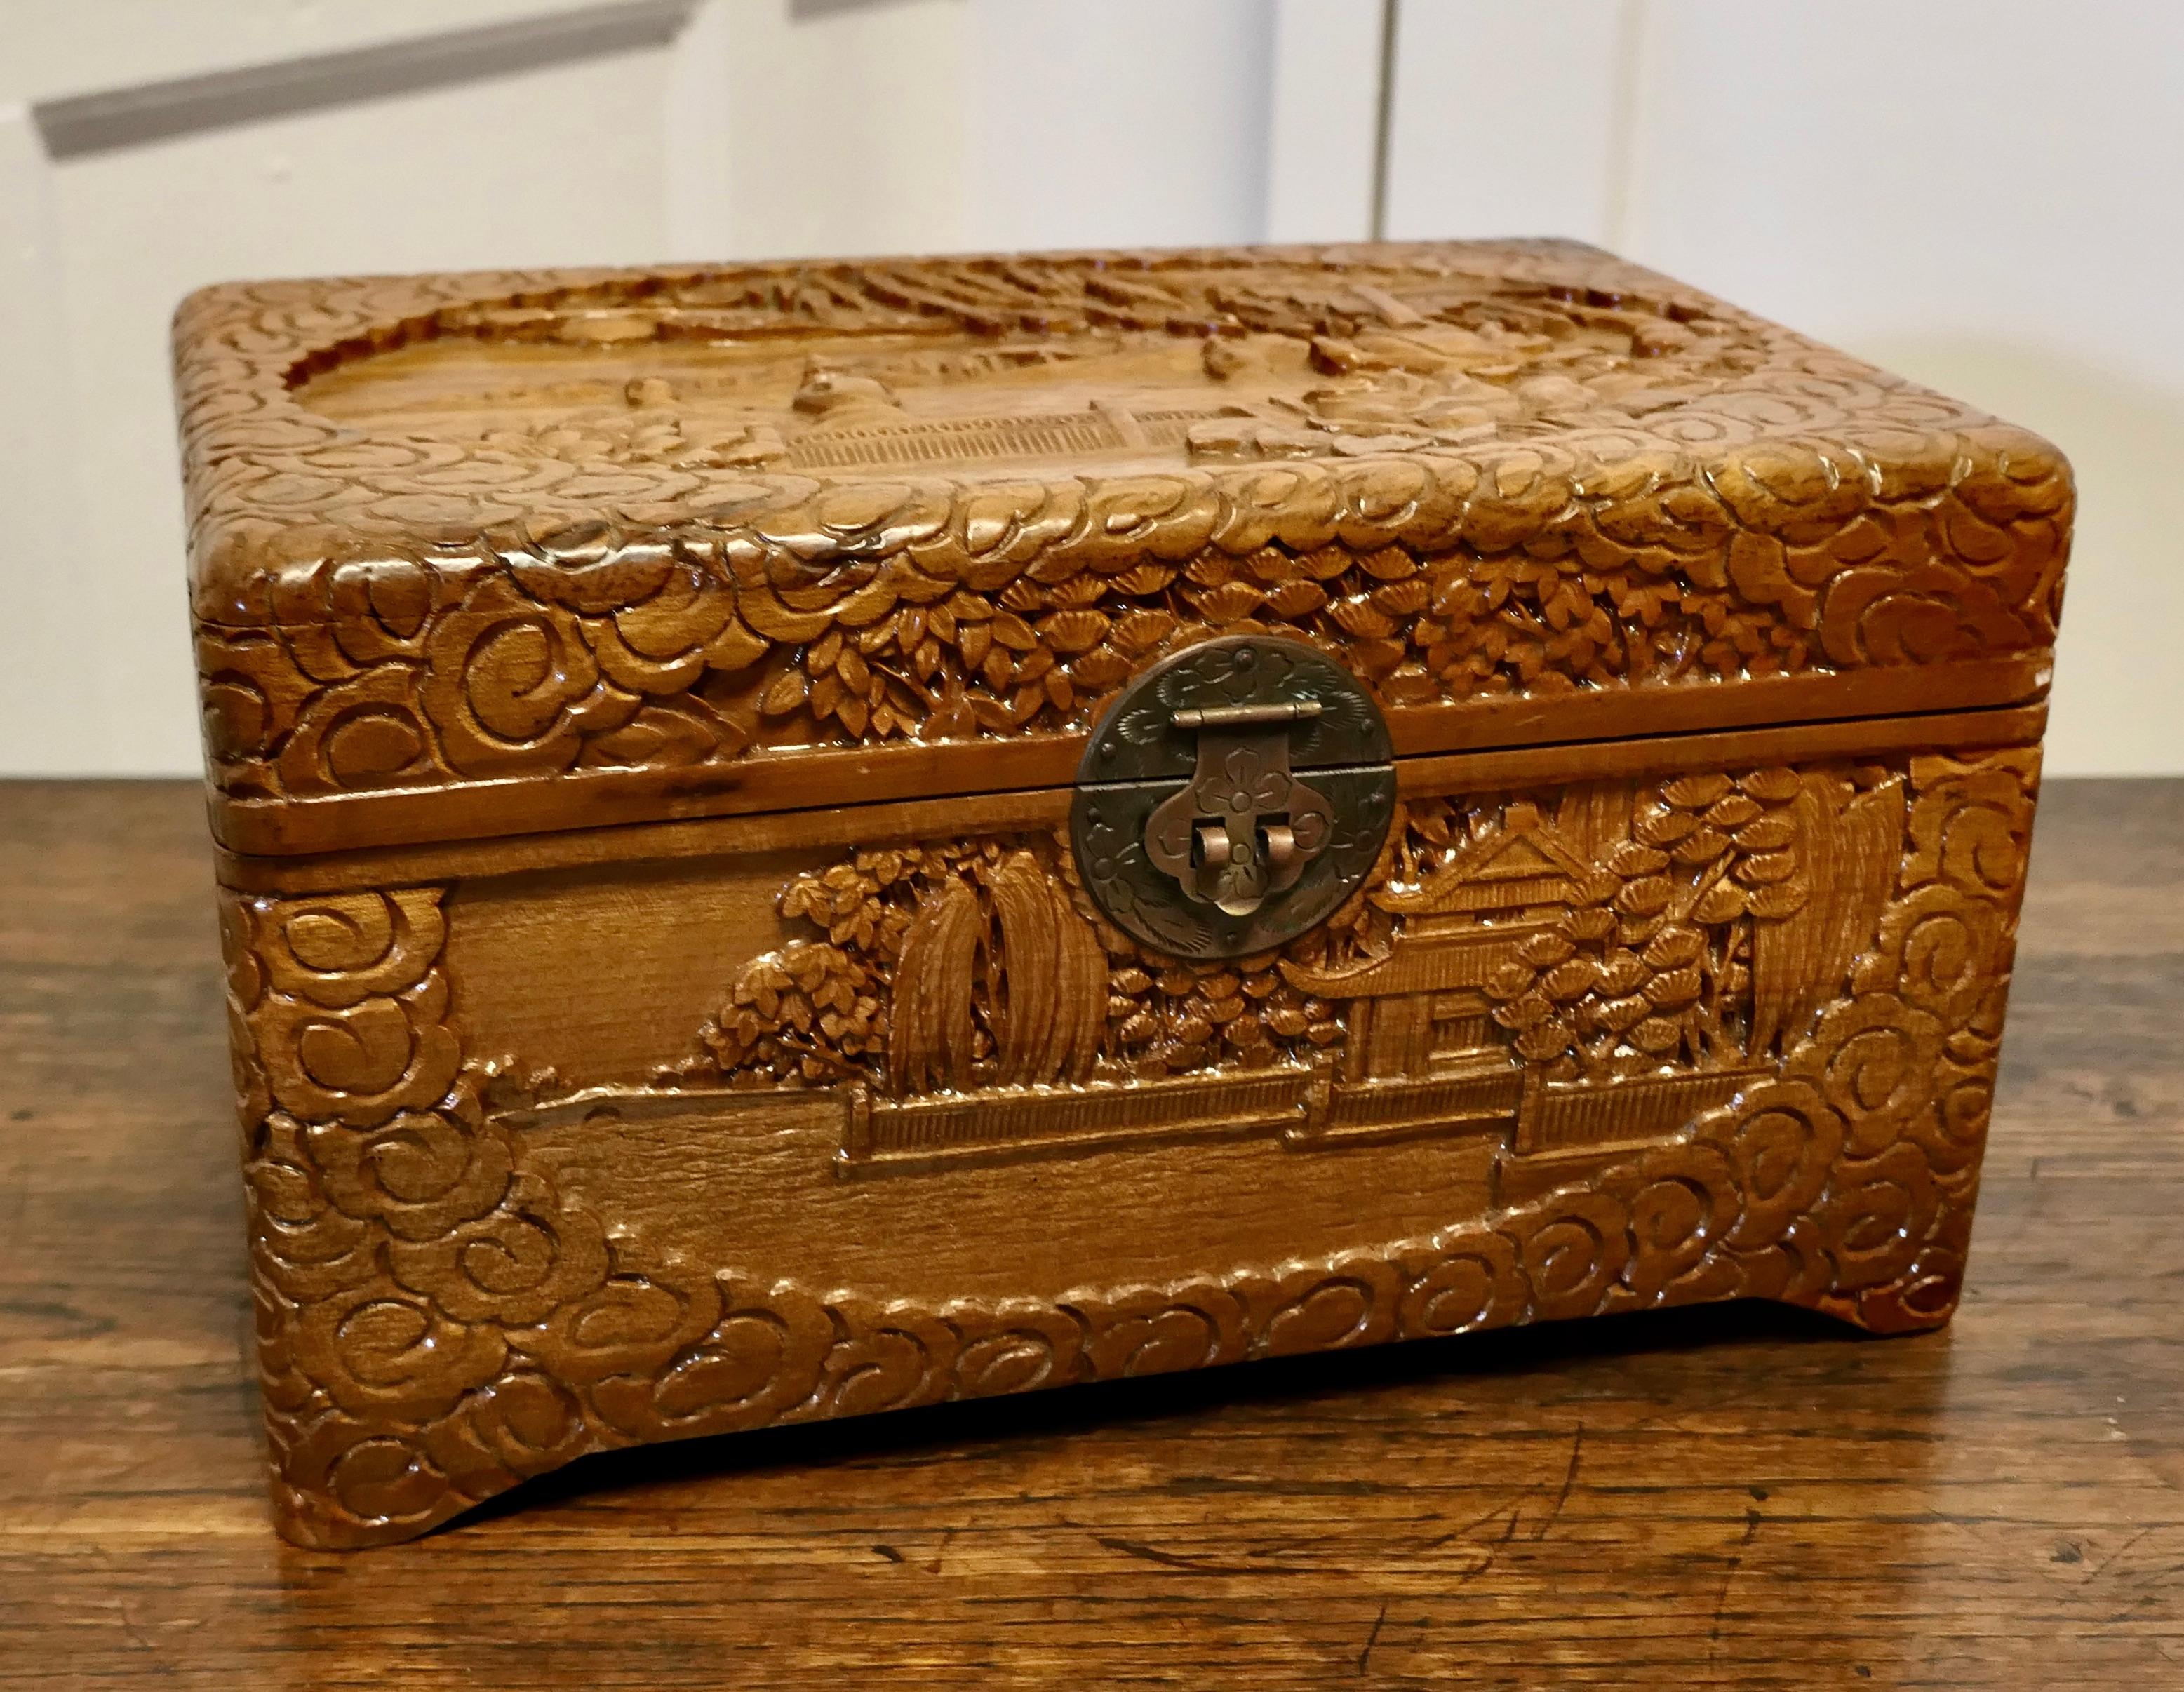 Oriental carved camphor wood chest, jewellery casket.

This beautiful carved chest is made from camphor wood, for those of you who do not know camphor wood it is a hard wood which lends itself very well to carving and it has an excellent